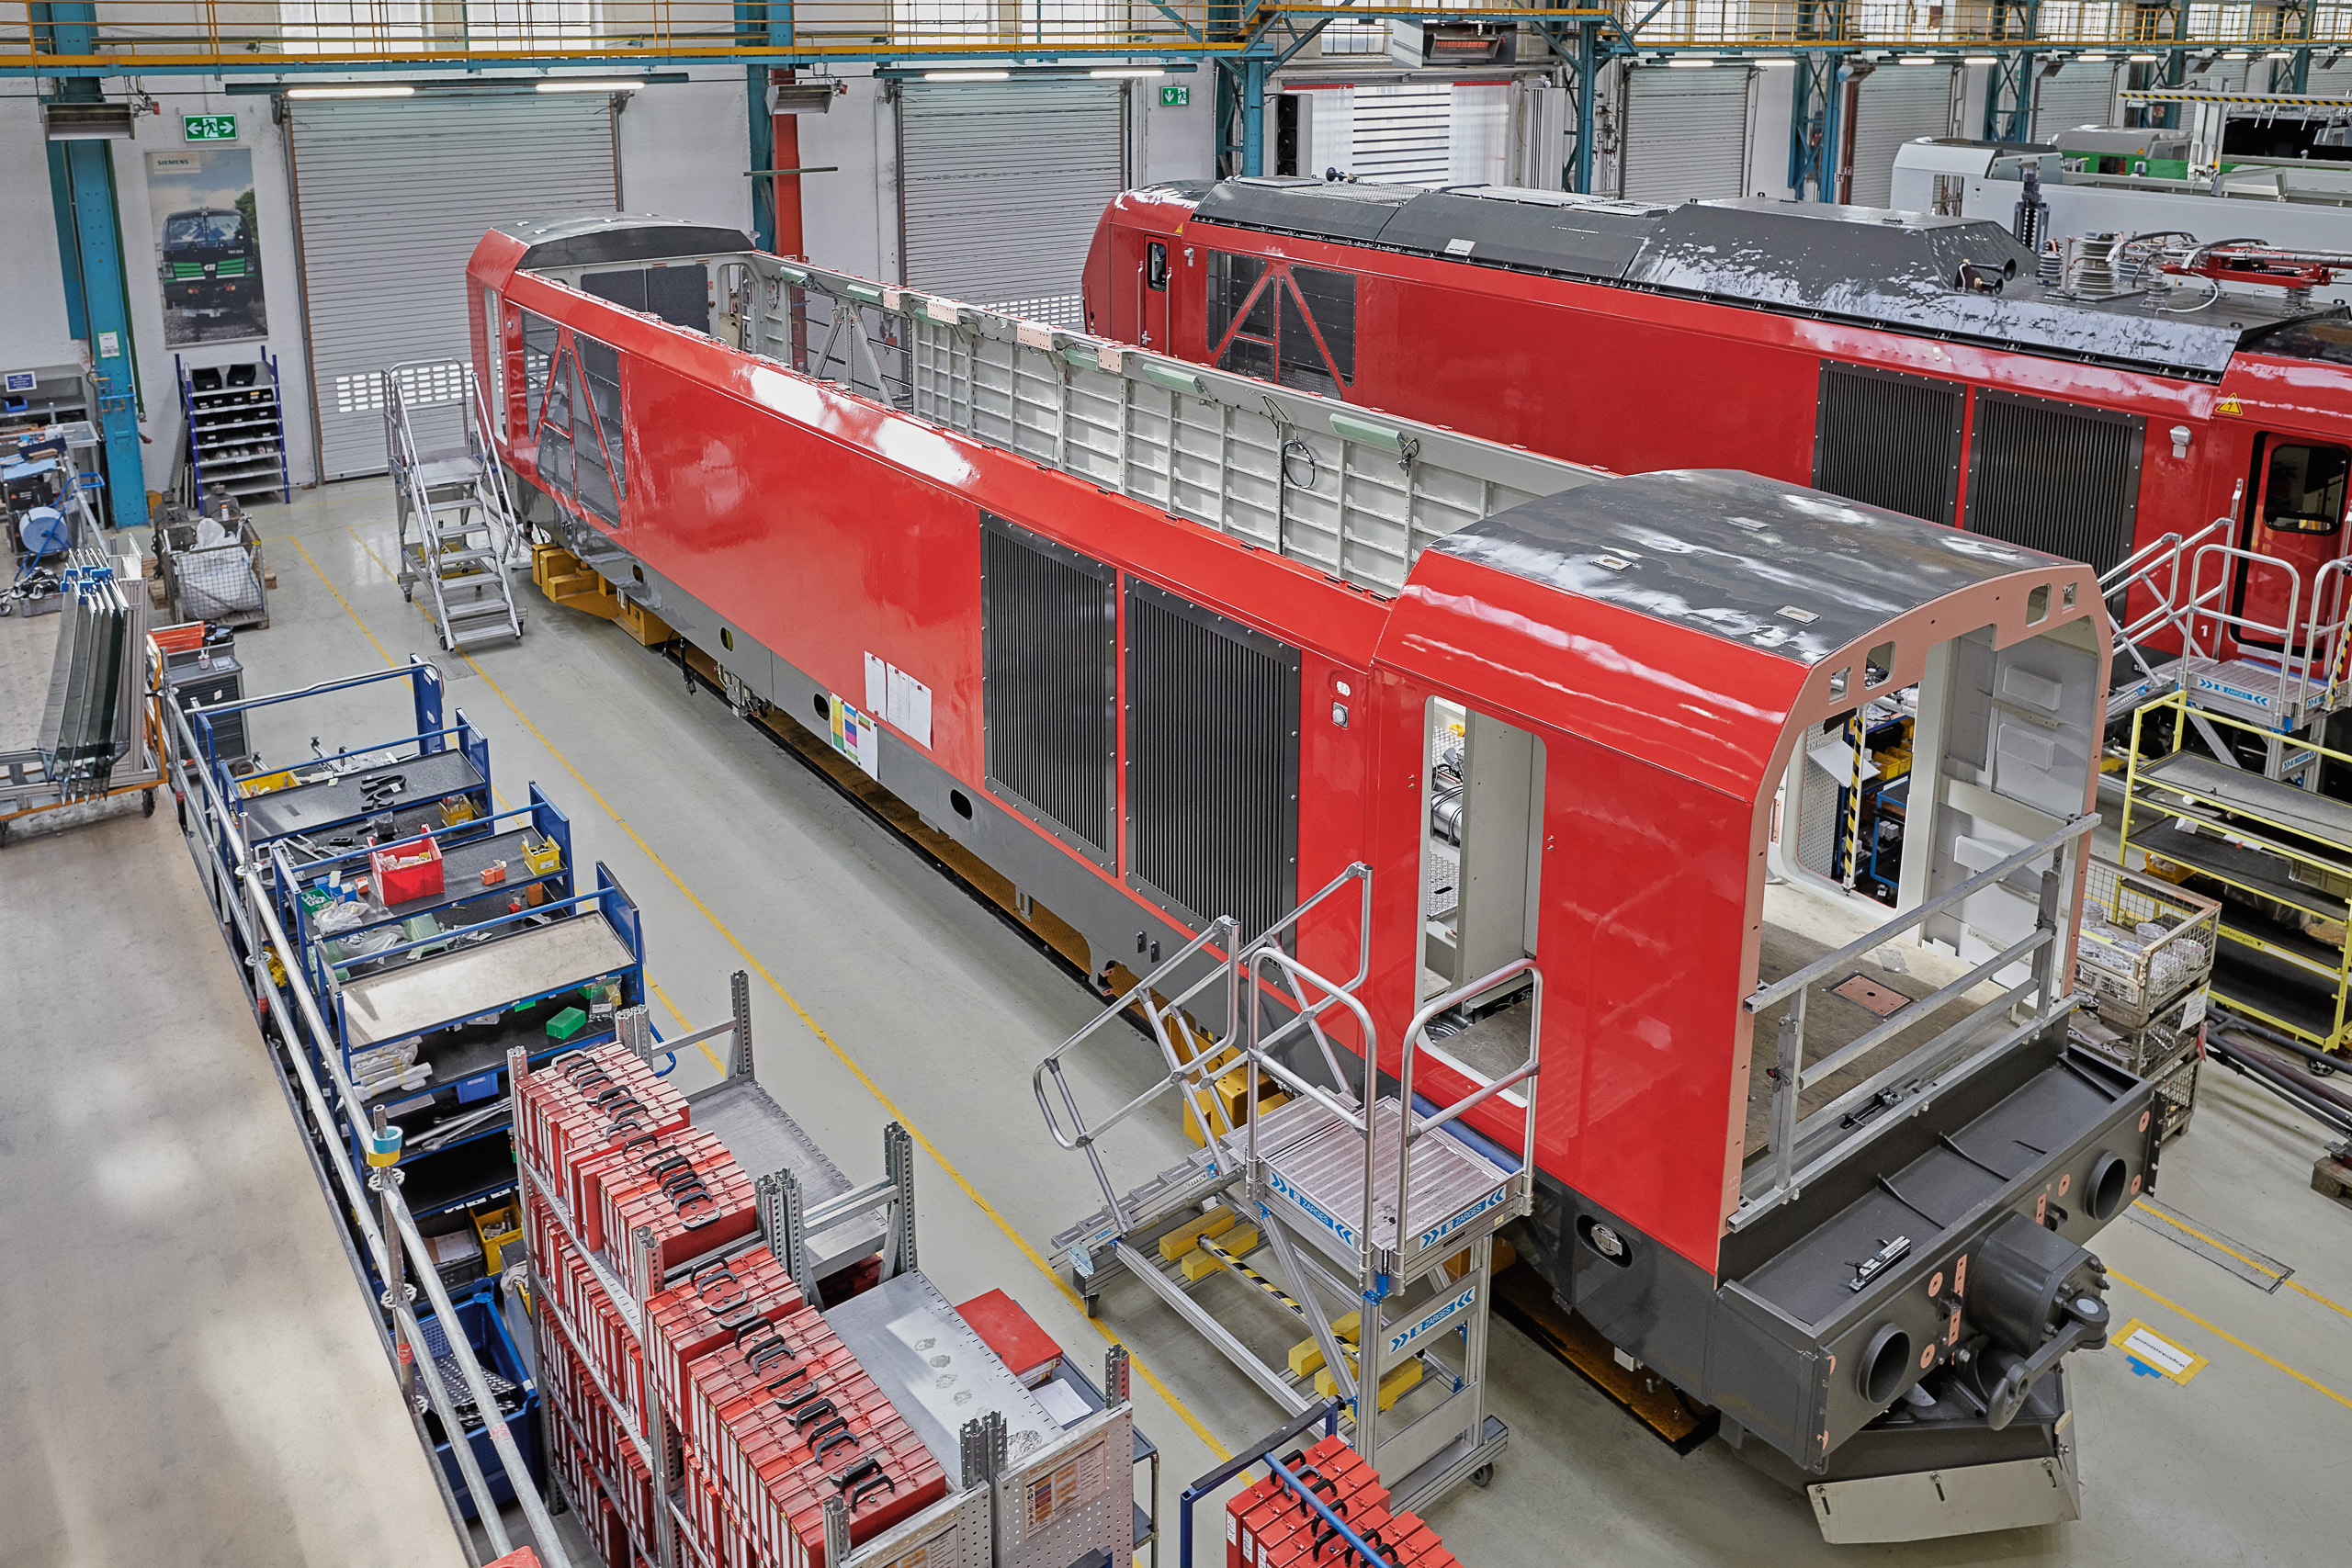 Assembly of the Vectron electric locomotive at the Siemens Mobility plant near Munich, Germany